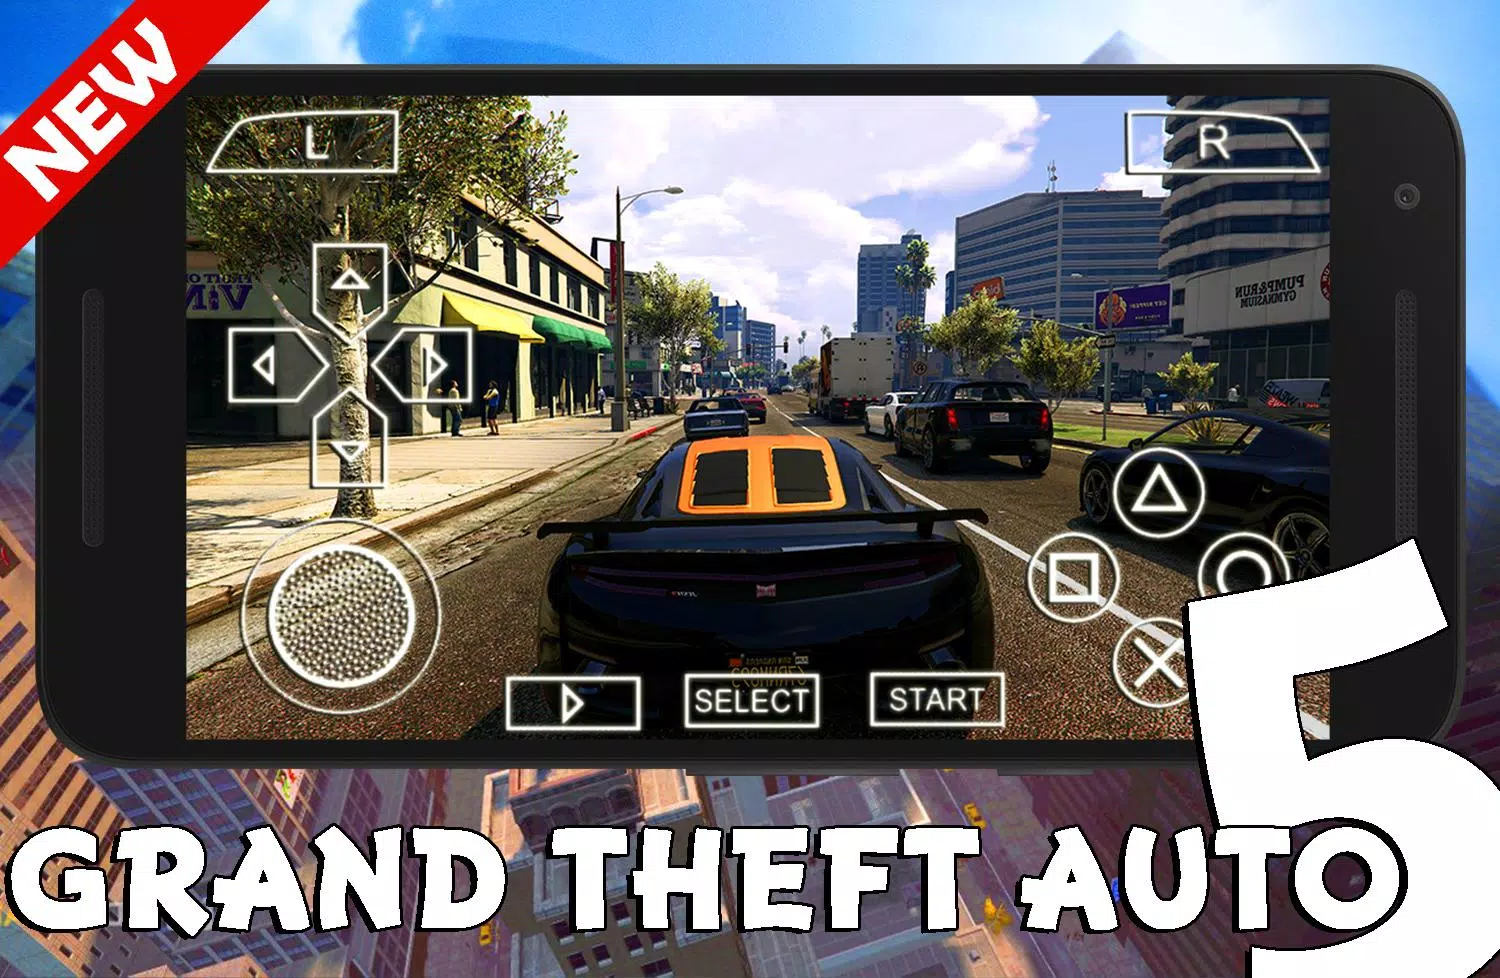 GTA 5 PPSSPP Download- Play Grand Theft Auto on Android